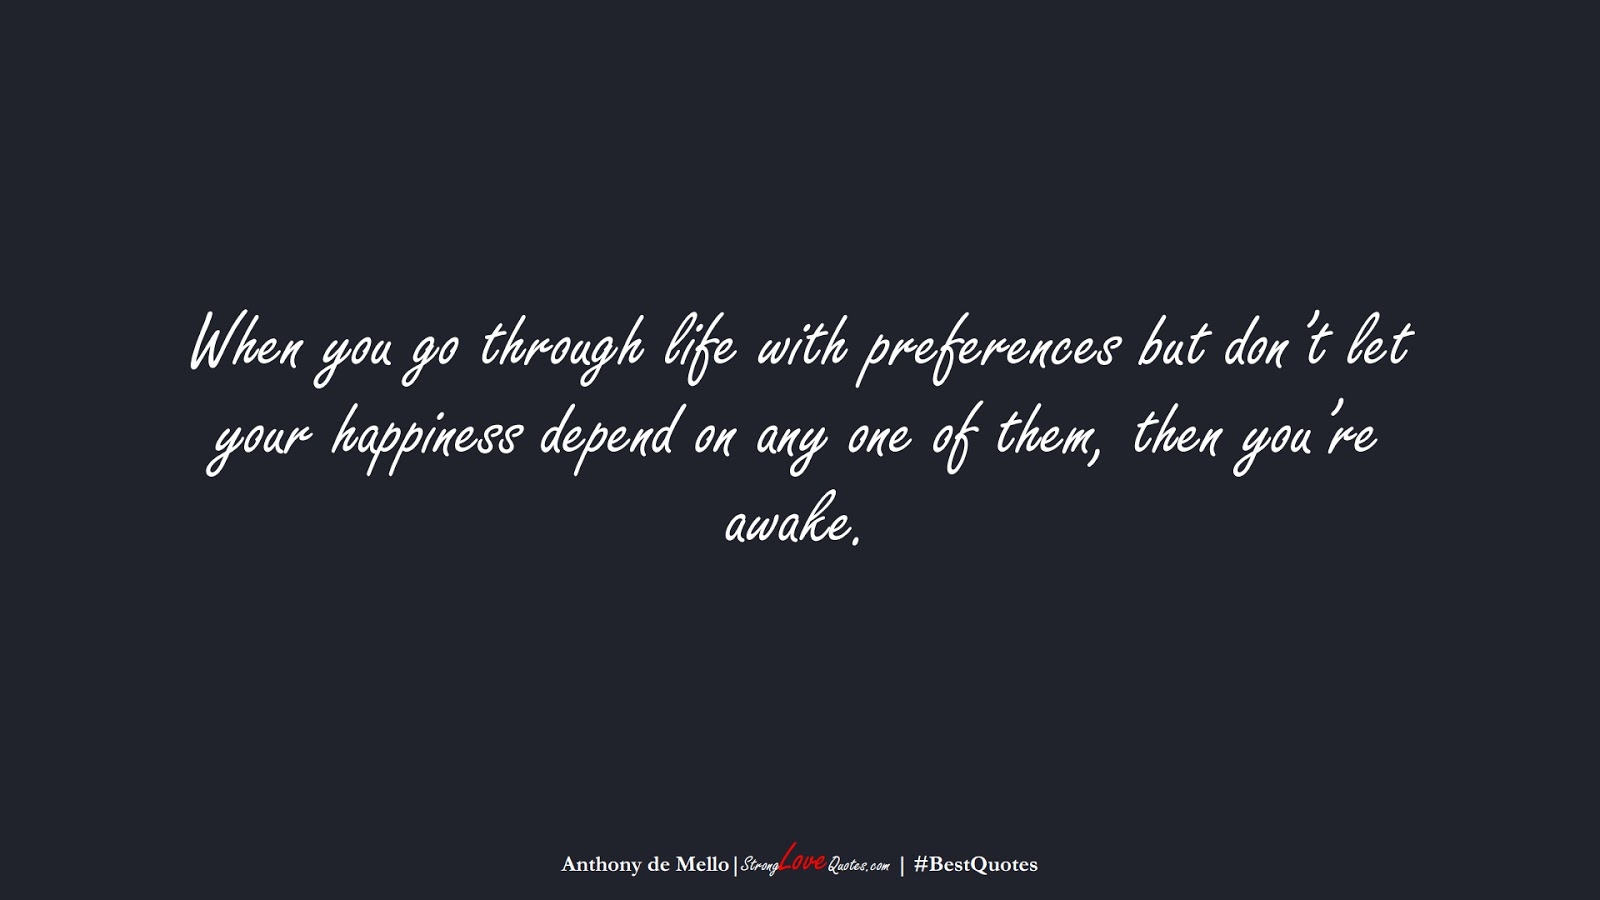 When you go through life with preferences but don’t let your happiness depend on any one of them, then you’re awake. (Anthony de Mello);  #BestQuotes